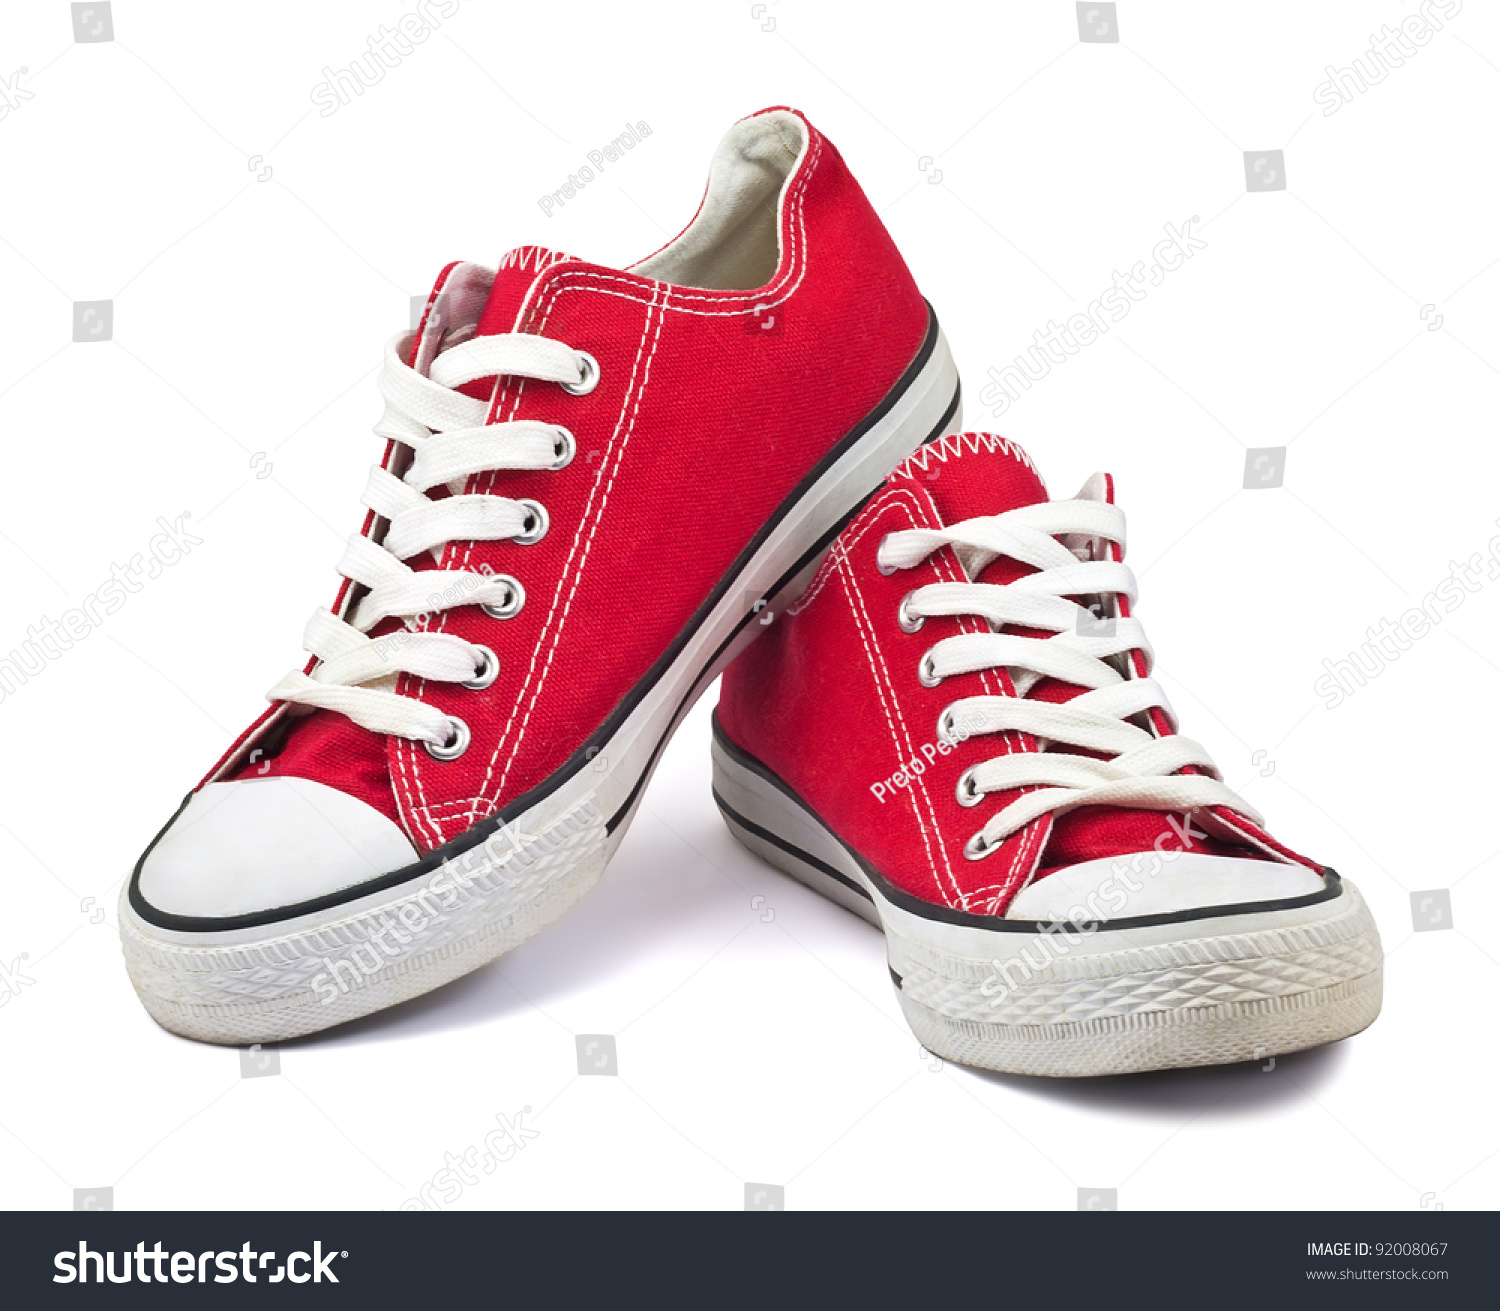 Vintage Red Shoes On White Background Stock Photo 92008067 - Shutterstock